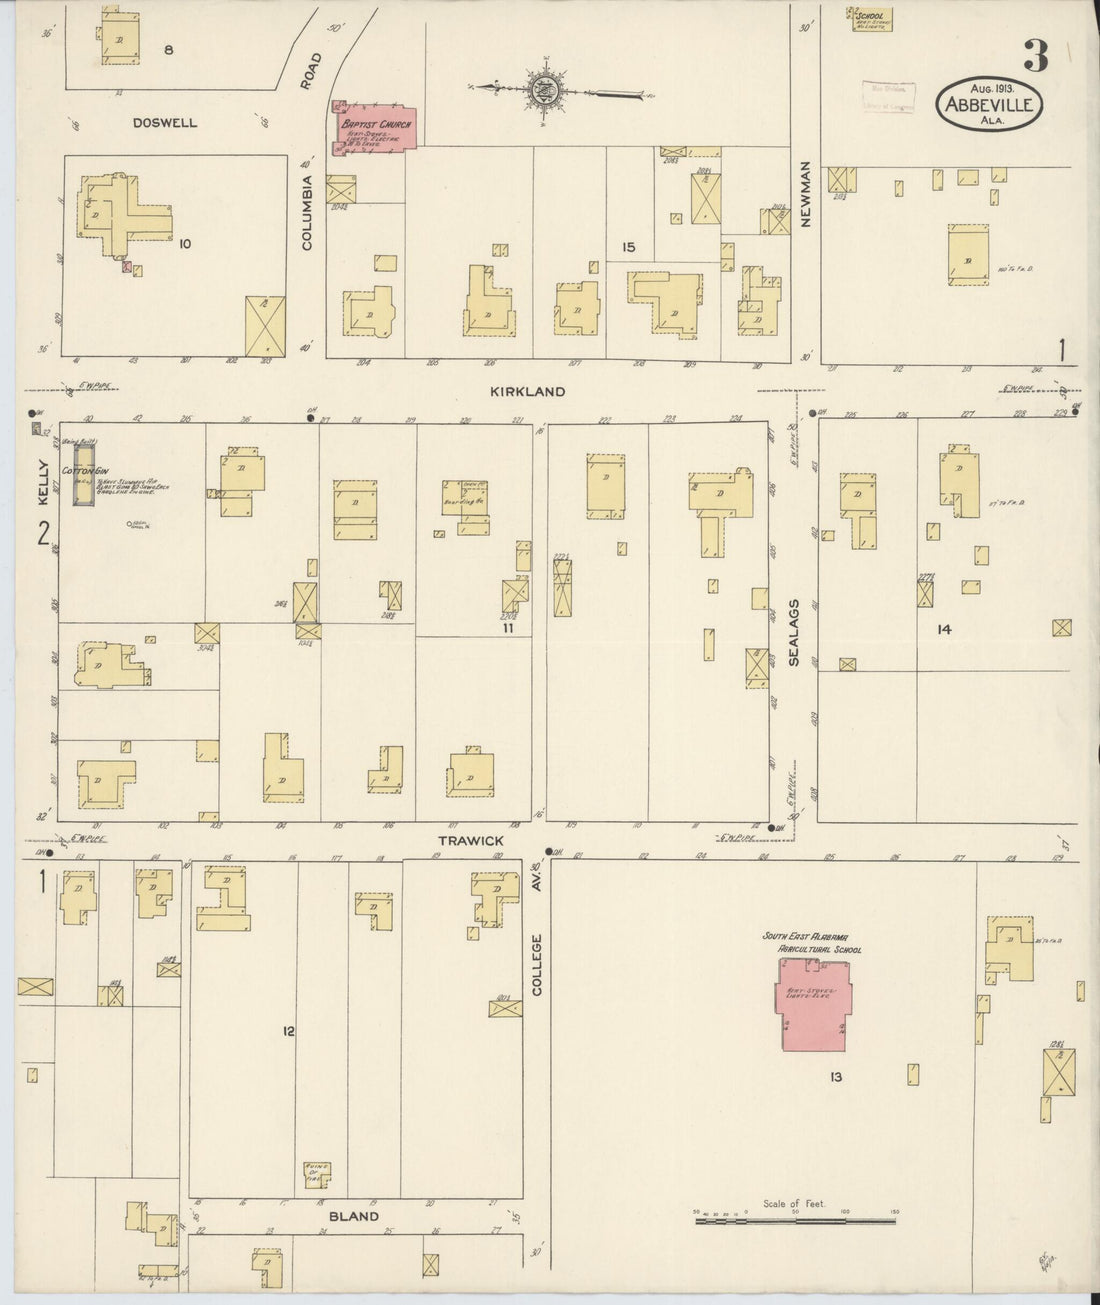 This old map of Abbeville, Henry County, Alabama was created by Sanborn Map Company in 1913